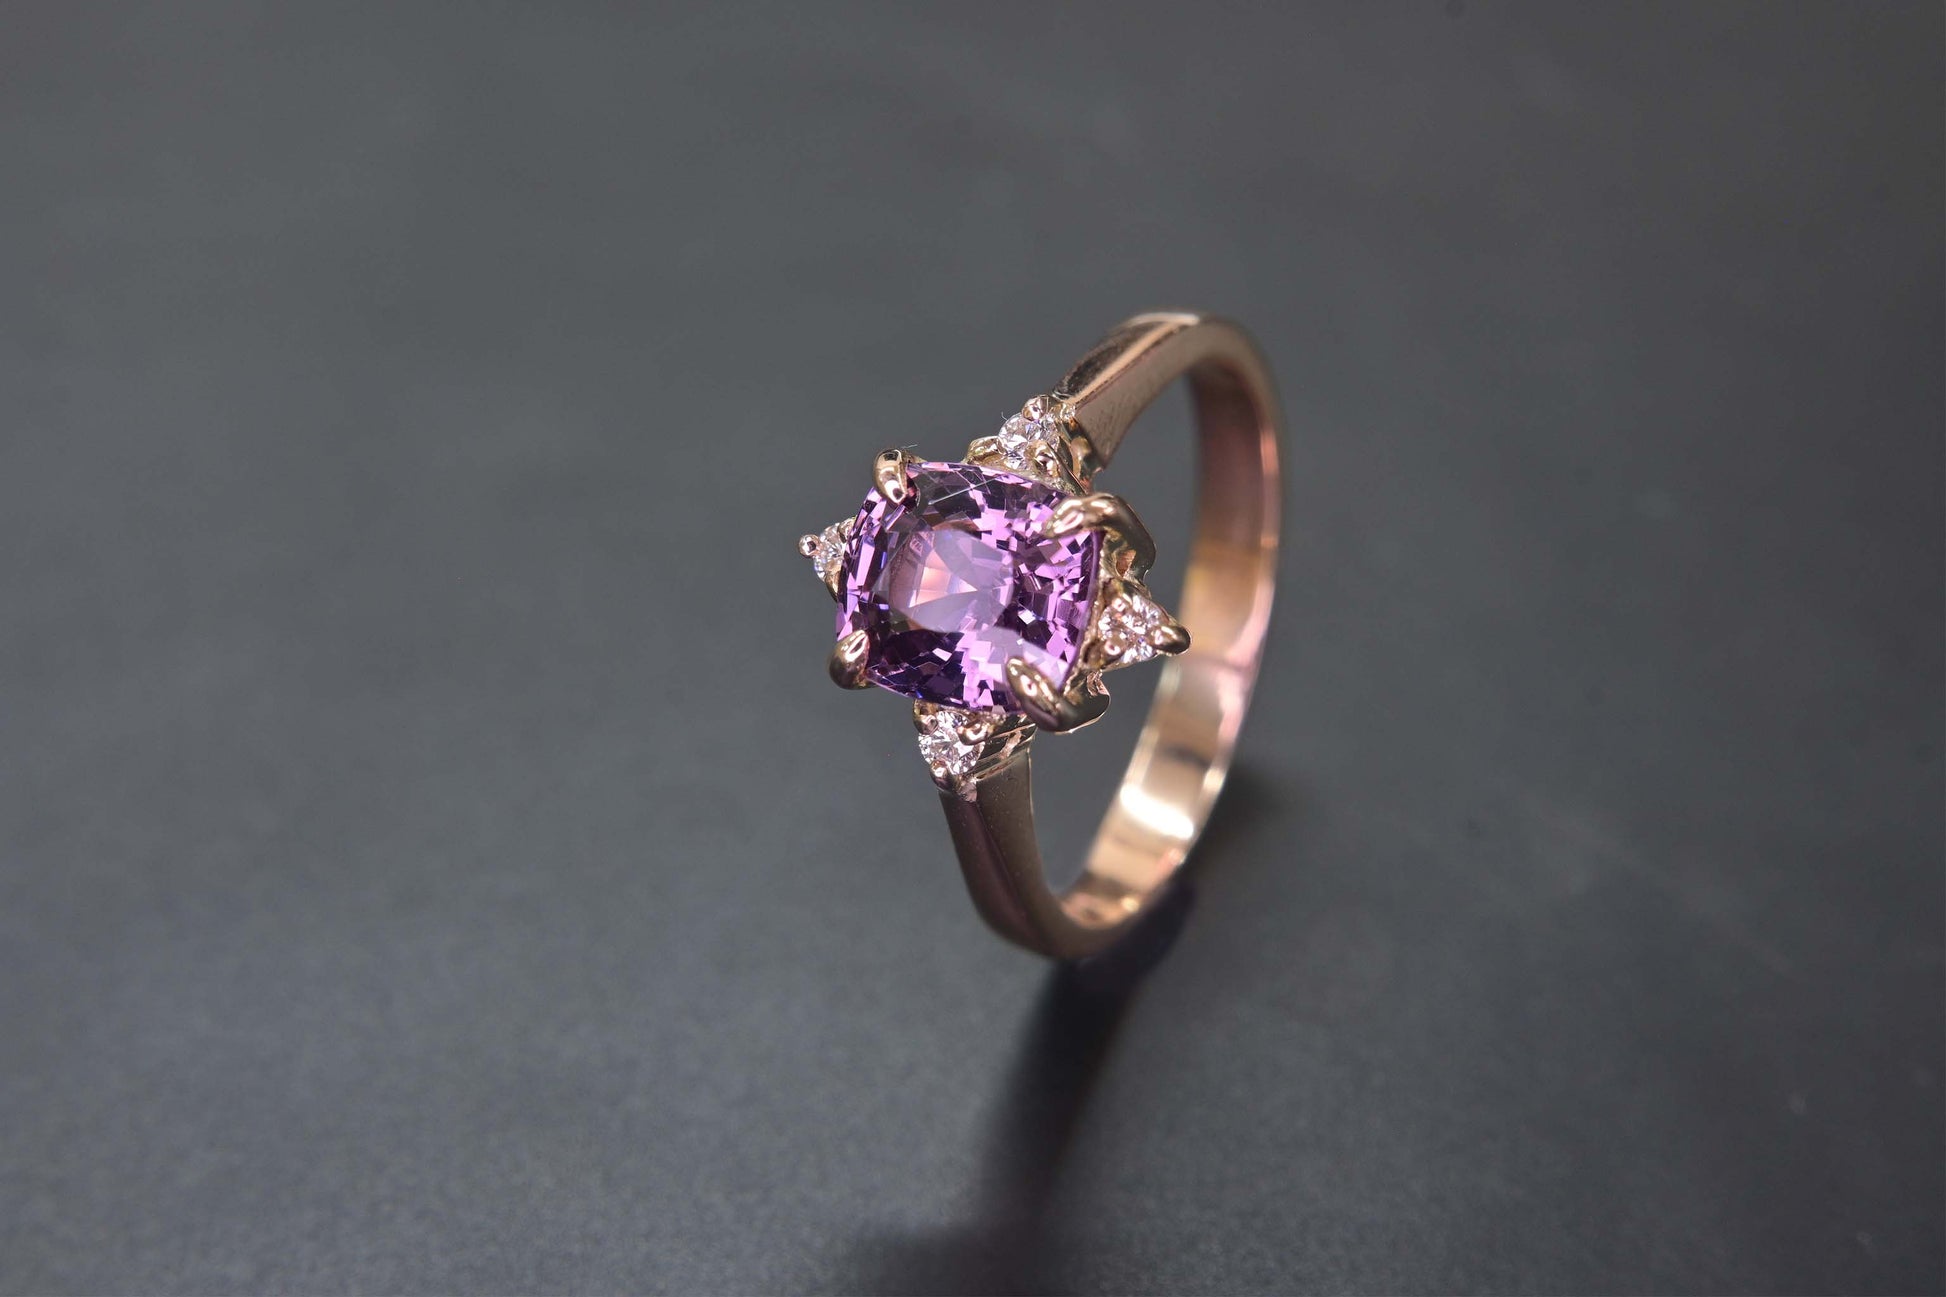 Handcrafted spinel ring in 14k rose gold available in Chiang Mai from Shiraz Jewelry